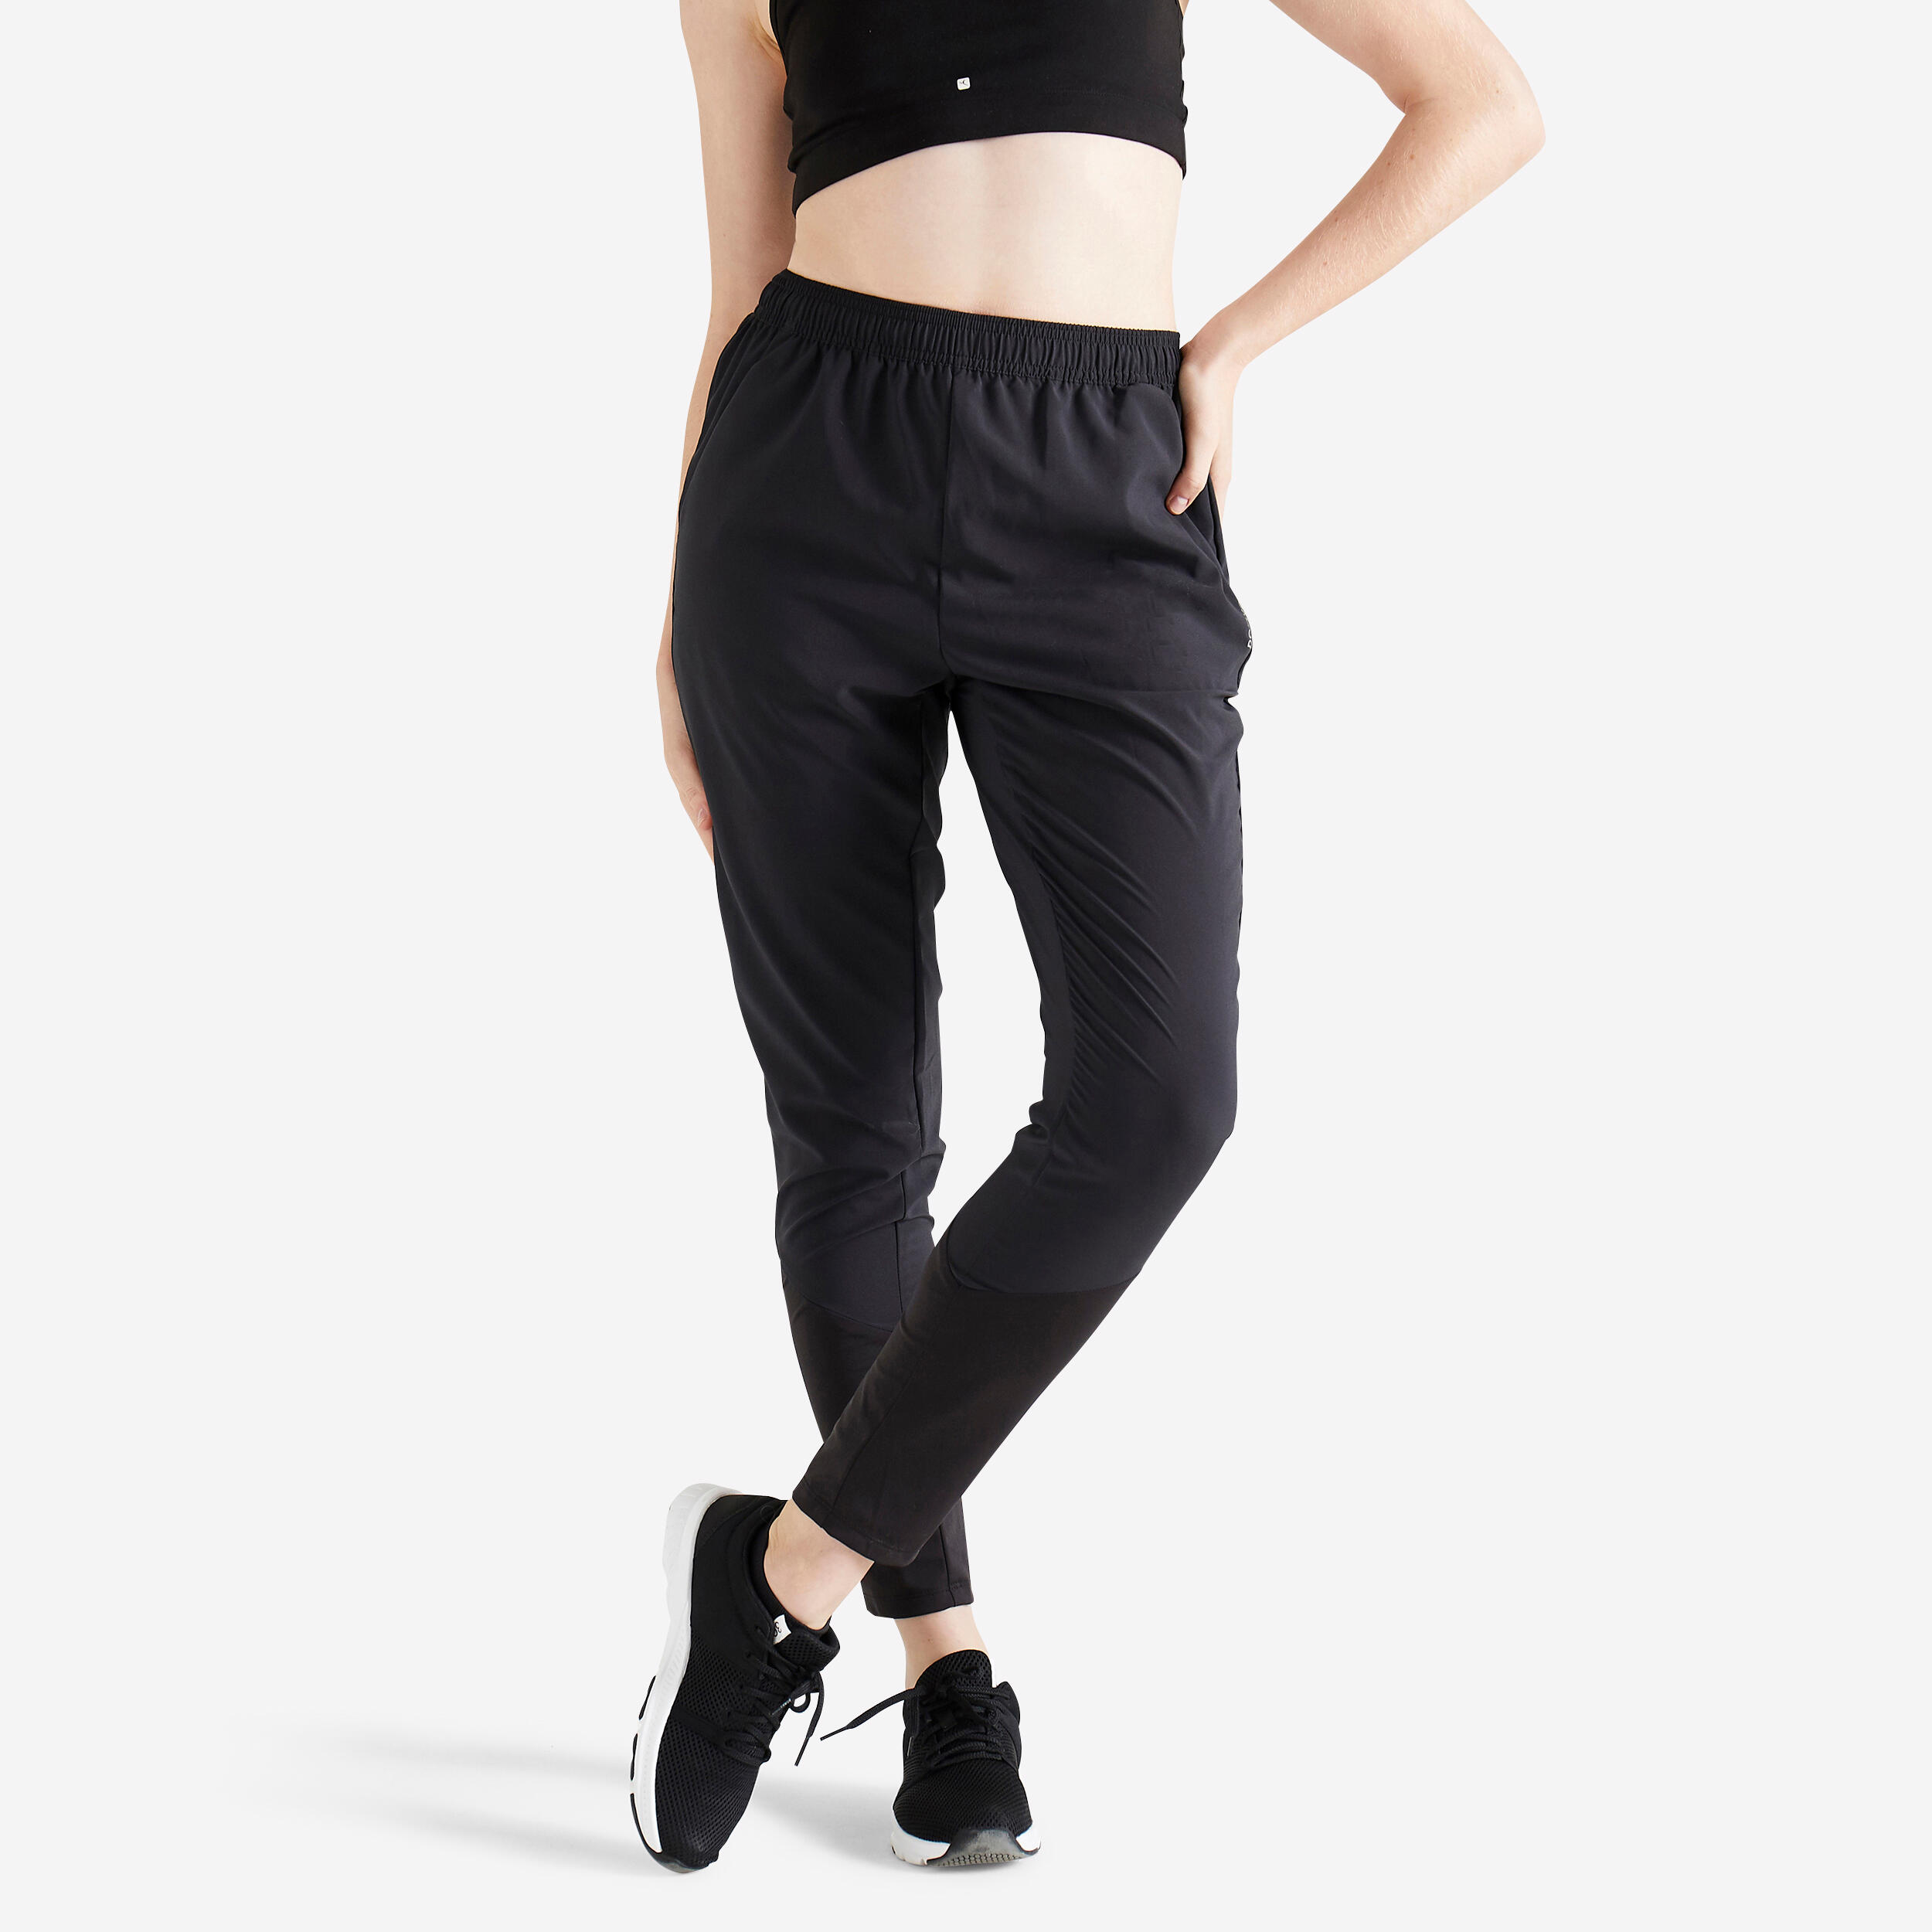 Buy Decathalon Domyos Flared Dance Trouser - Size XXS Black at Amazon.in